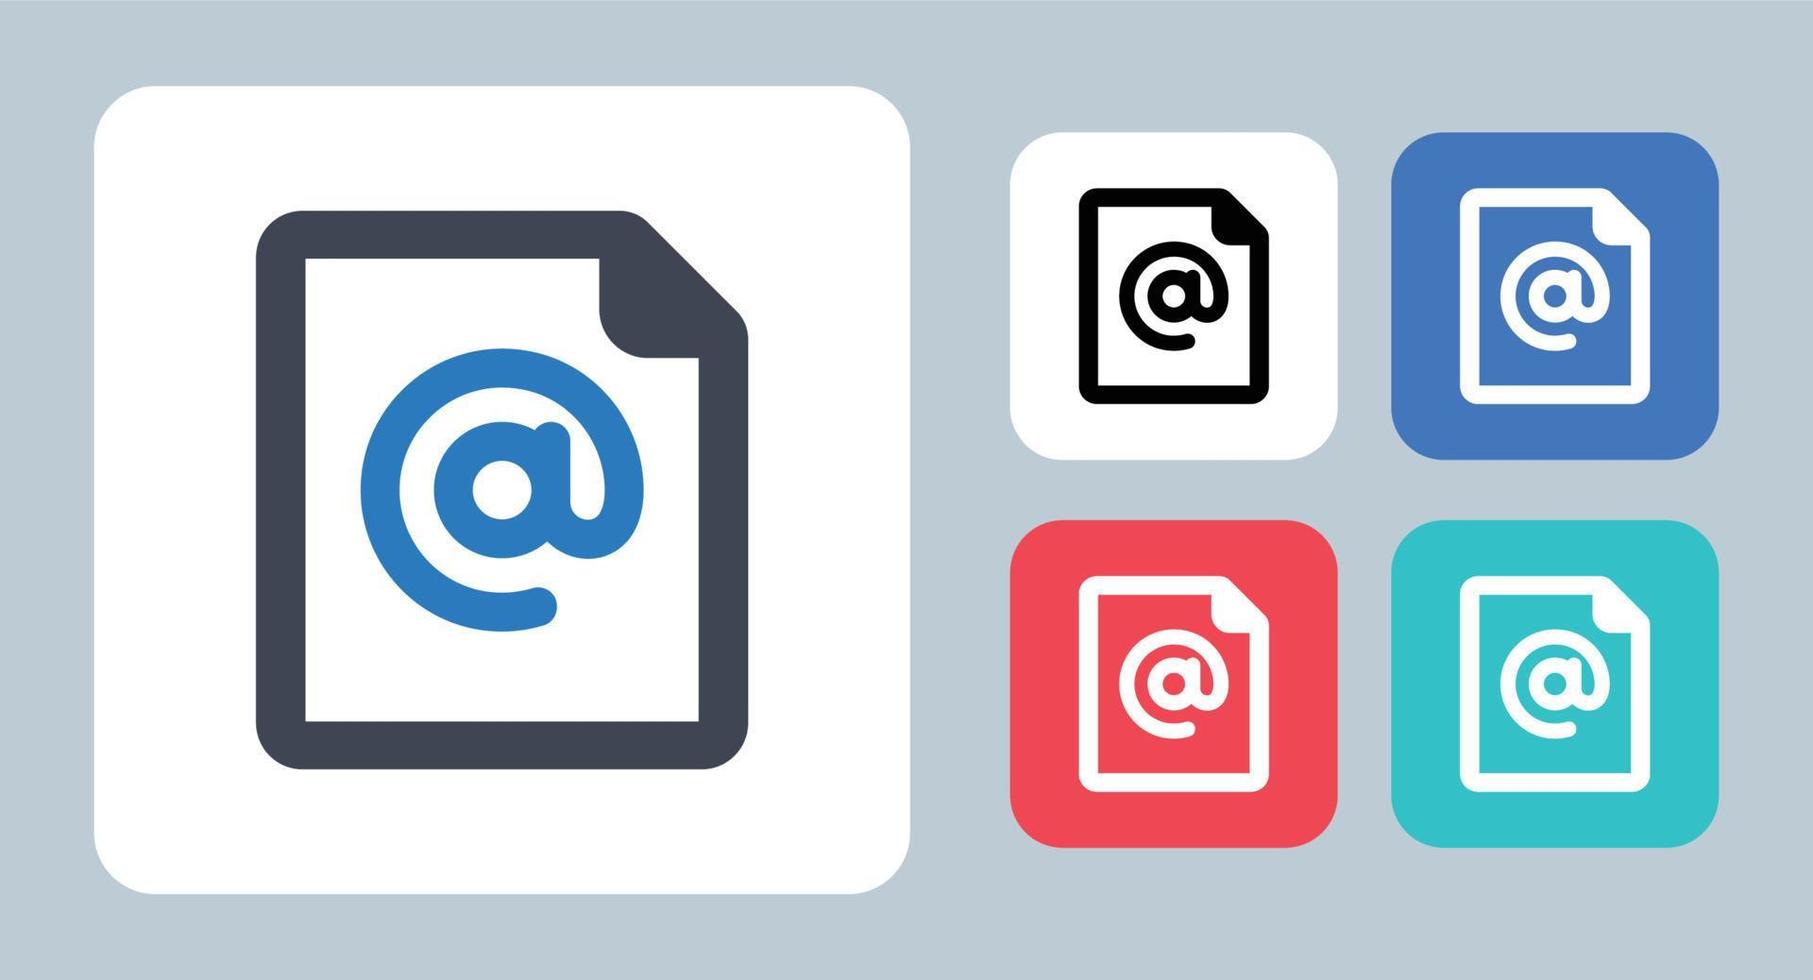 Email icon - vector illustration . Email, Mail, File, Document, Letter, Post, Contact, message, address, line, outline, flat, icons .